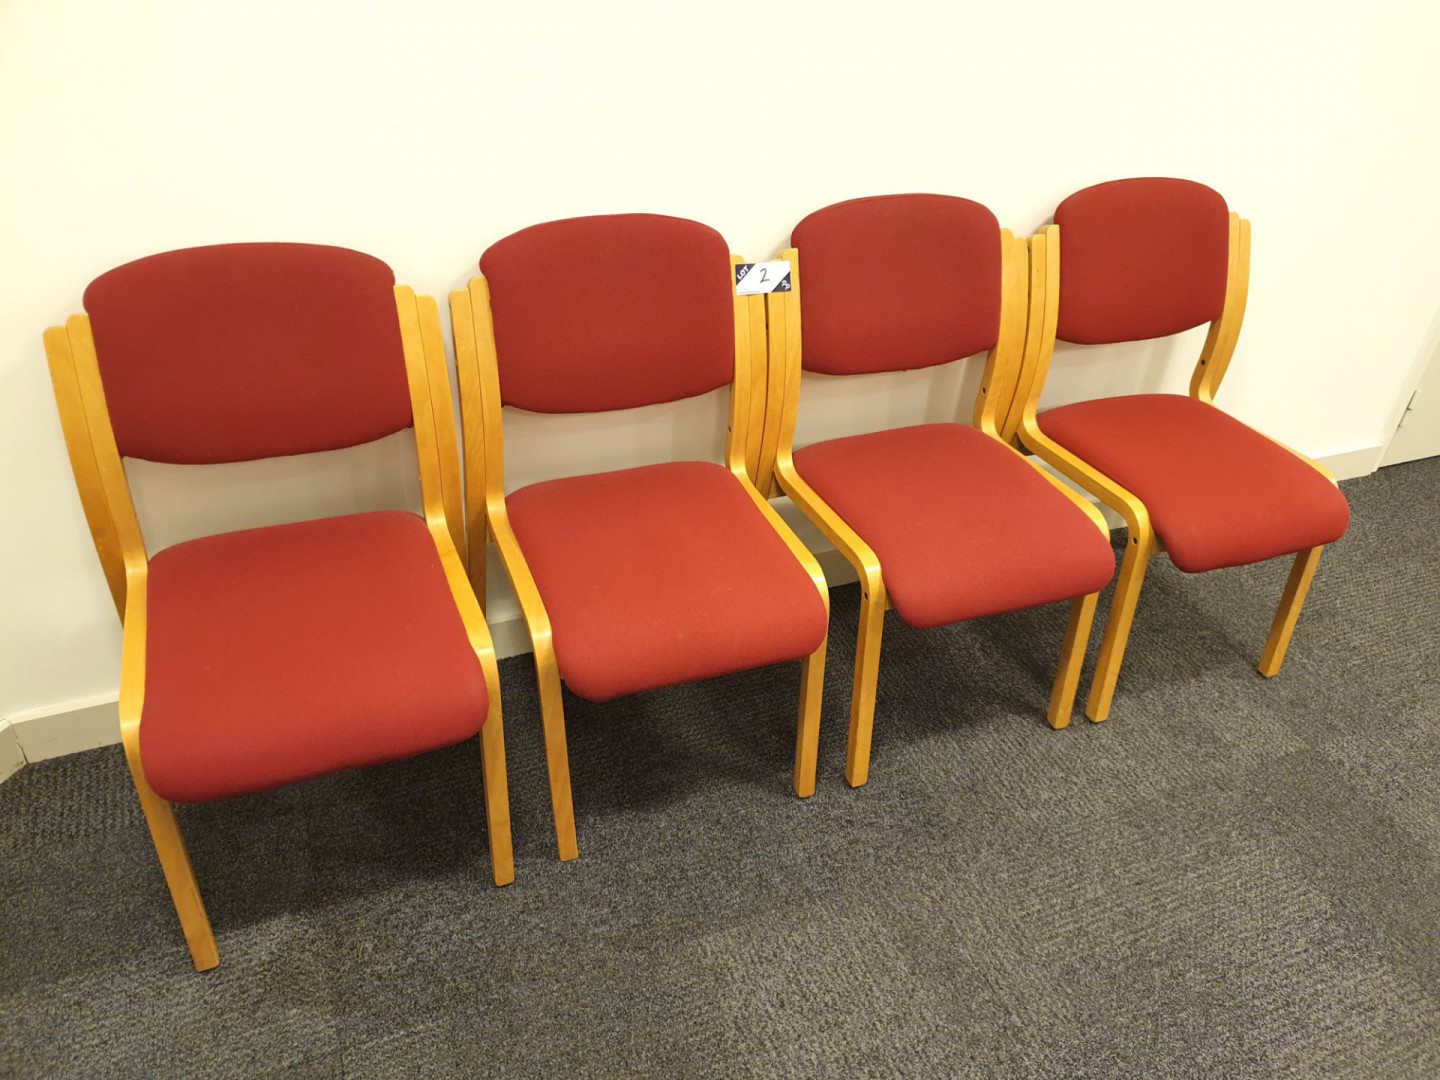 4x wooden frame red upholstered chairs